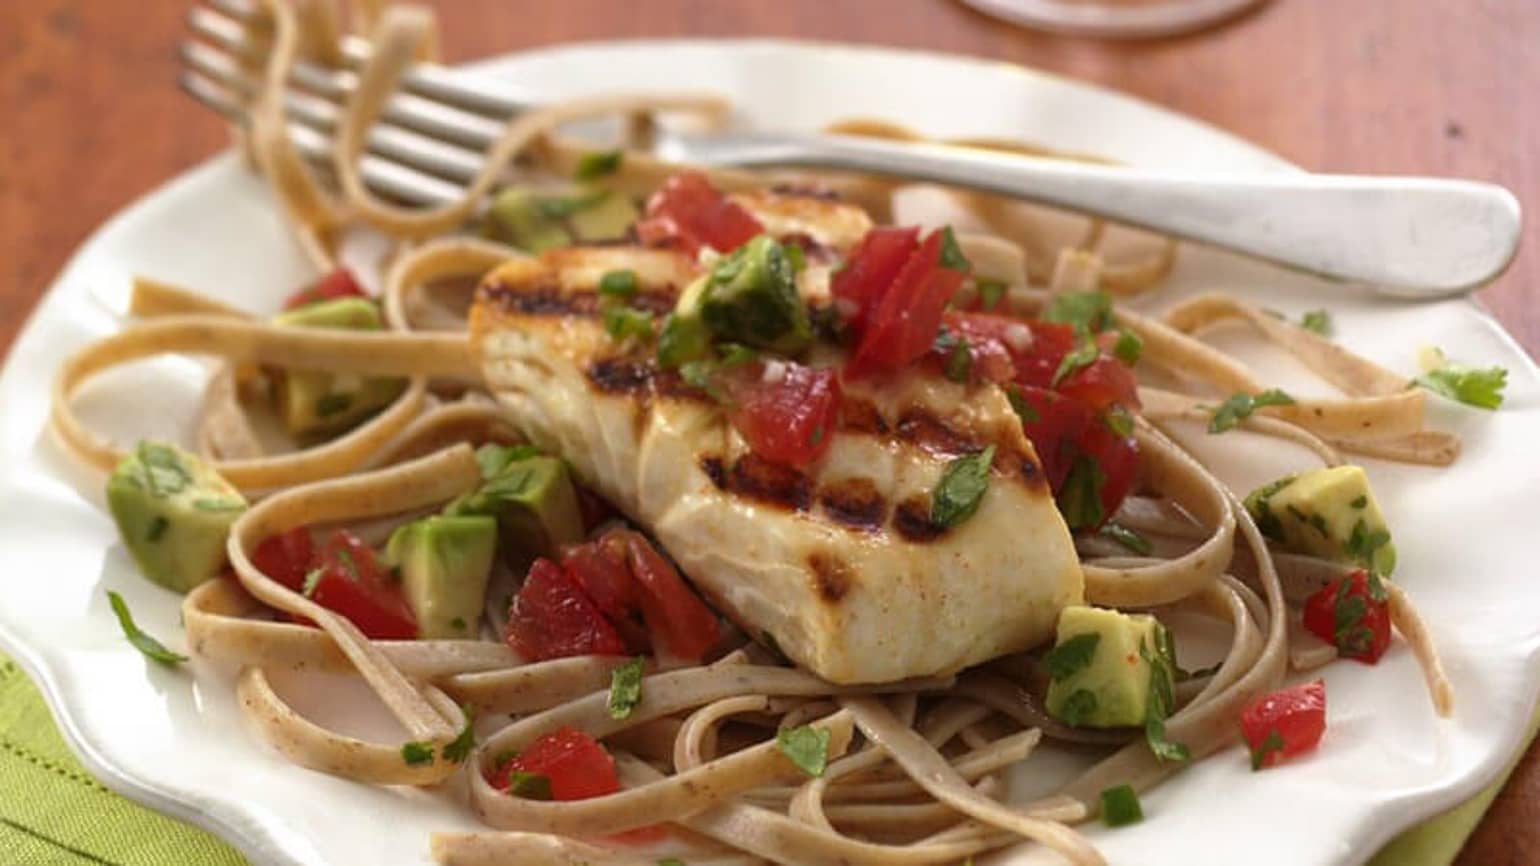 Grilled Halibut with Tomato-Avocado Salsa